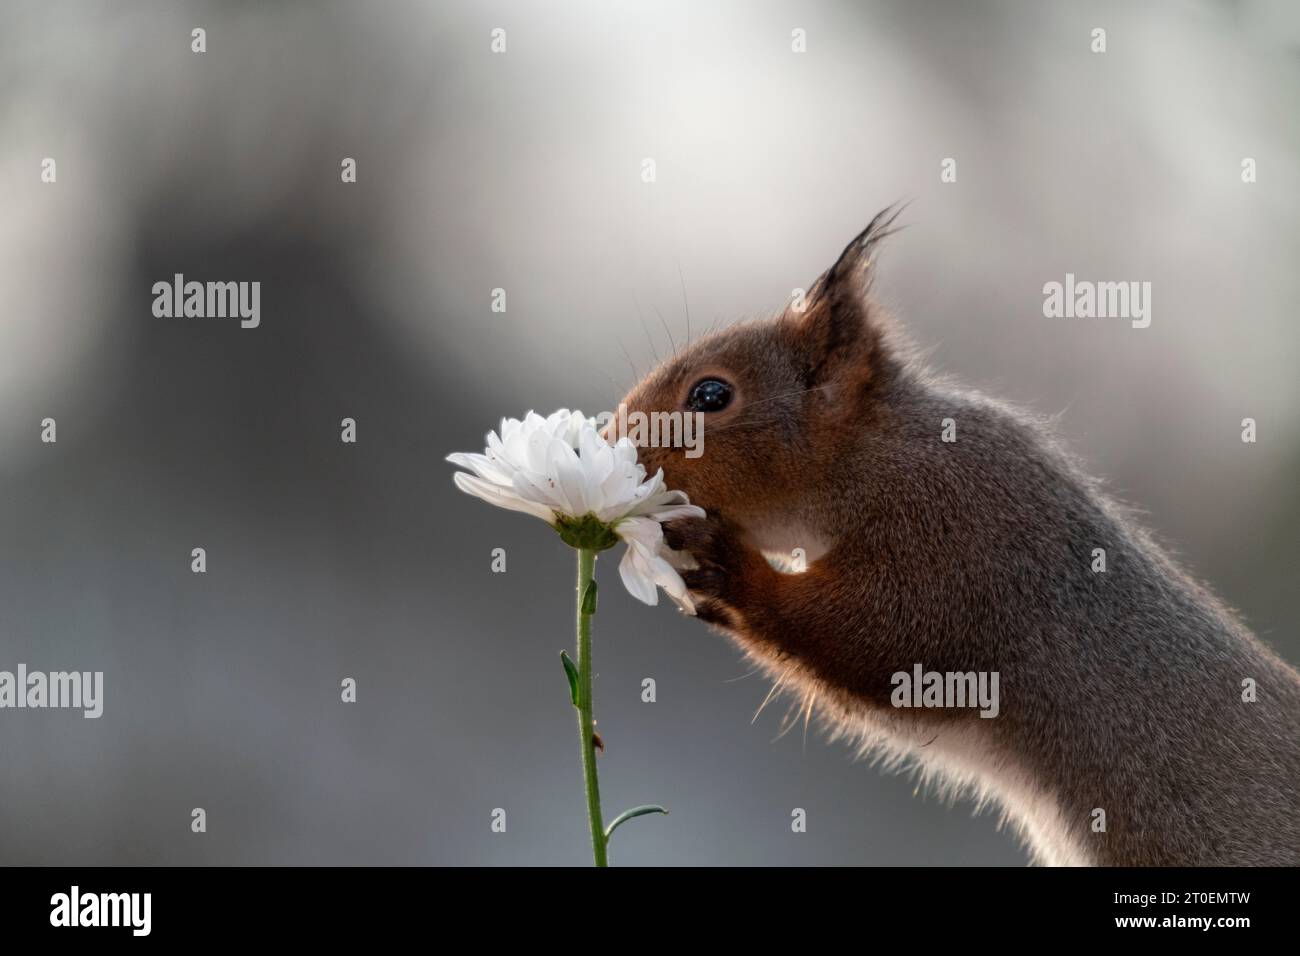 Red Squirrel smelling a white Dianthus flower Stock Photo